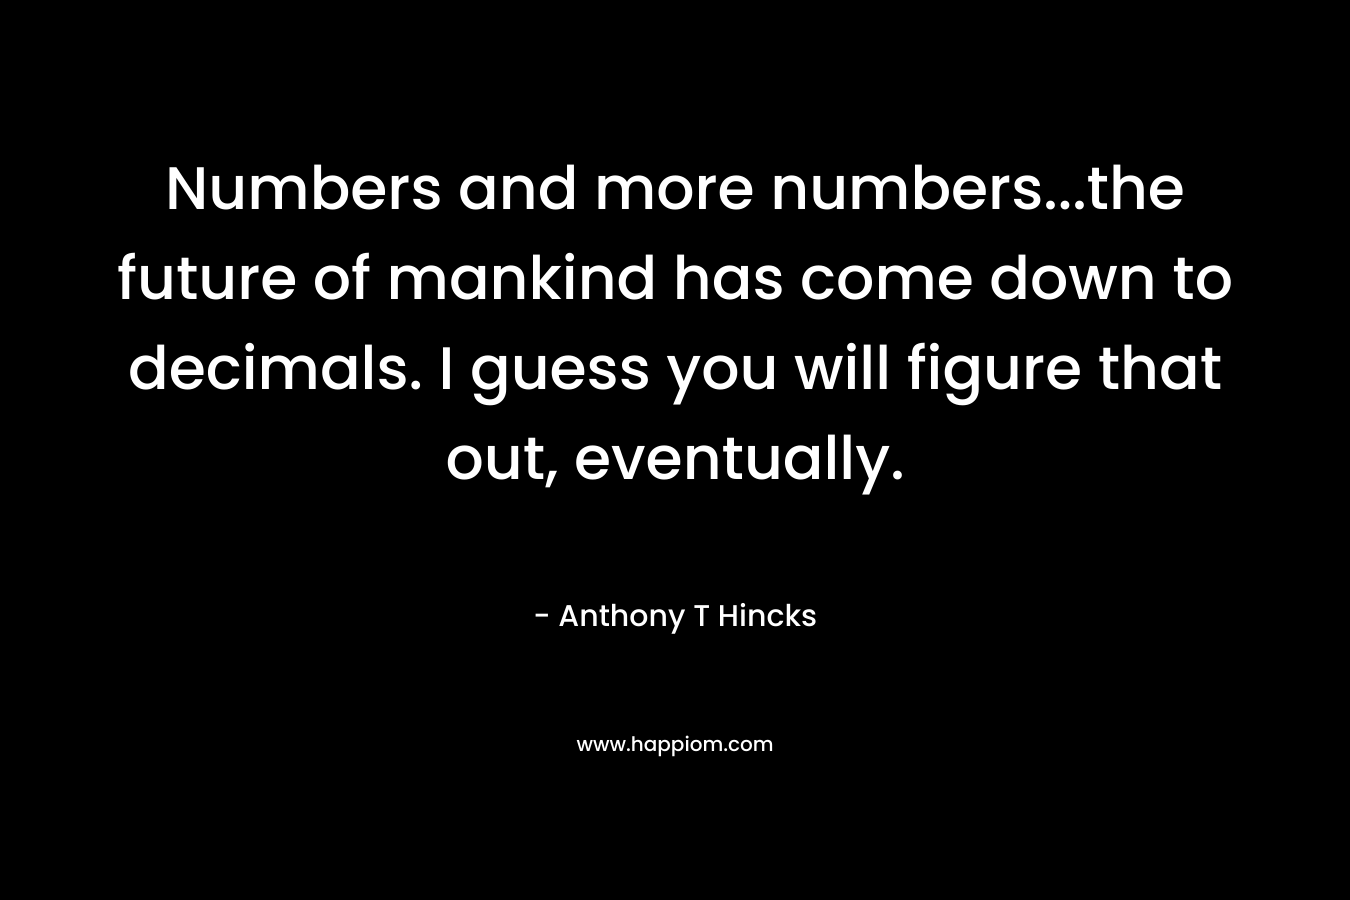 Numbers and more numbers...the future of mankind has come down to decimals. I guess you will figure that out, eventually.